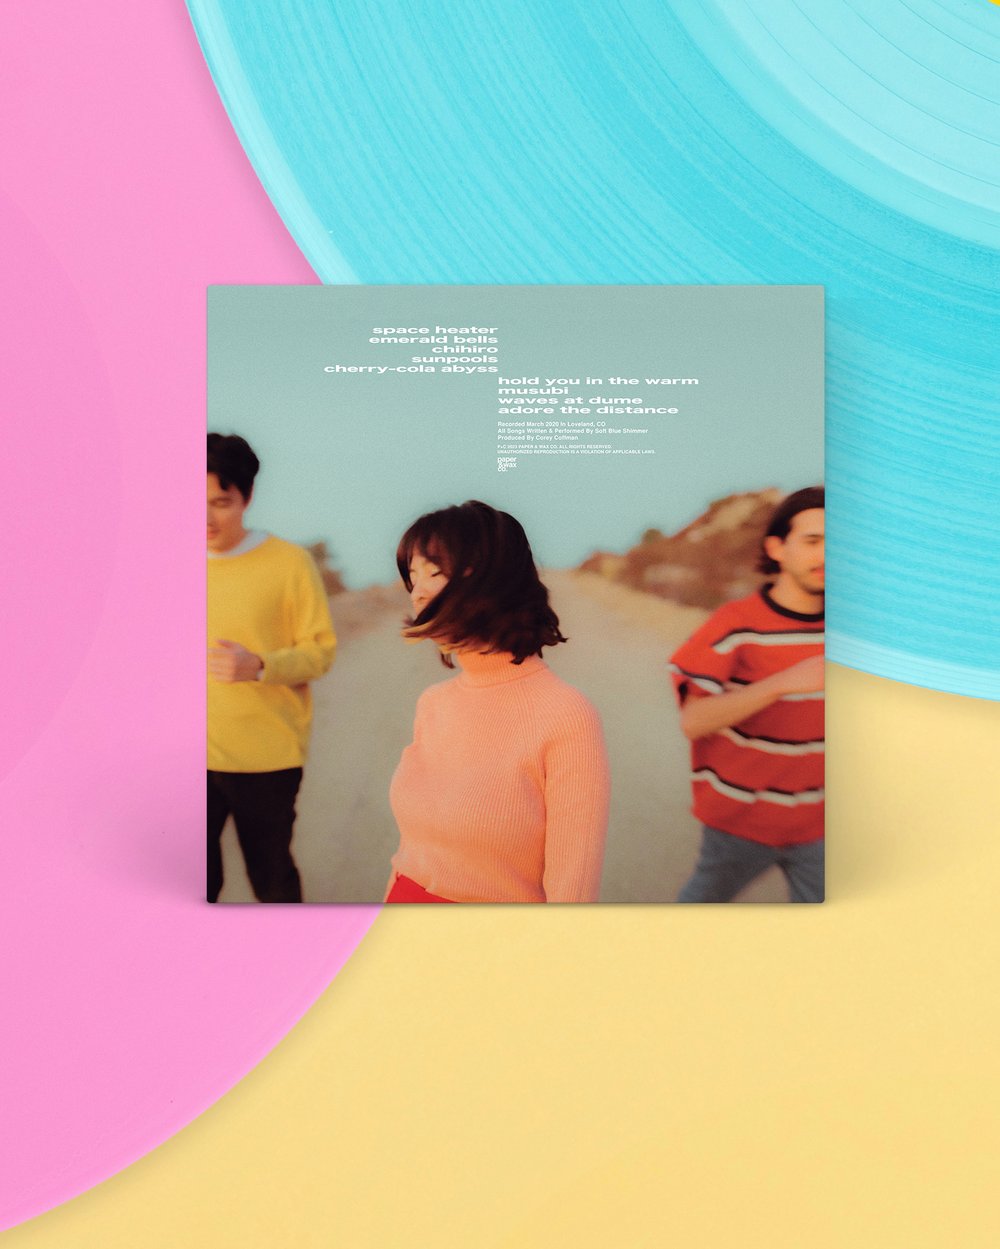 Soft Blue Shimmer - Heaven Inches Away (Yellow Vinyl) (/200) (SBS Exclusive)